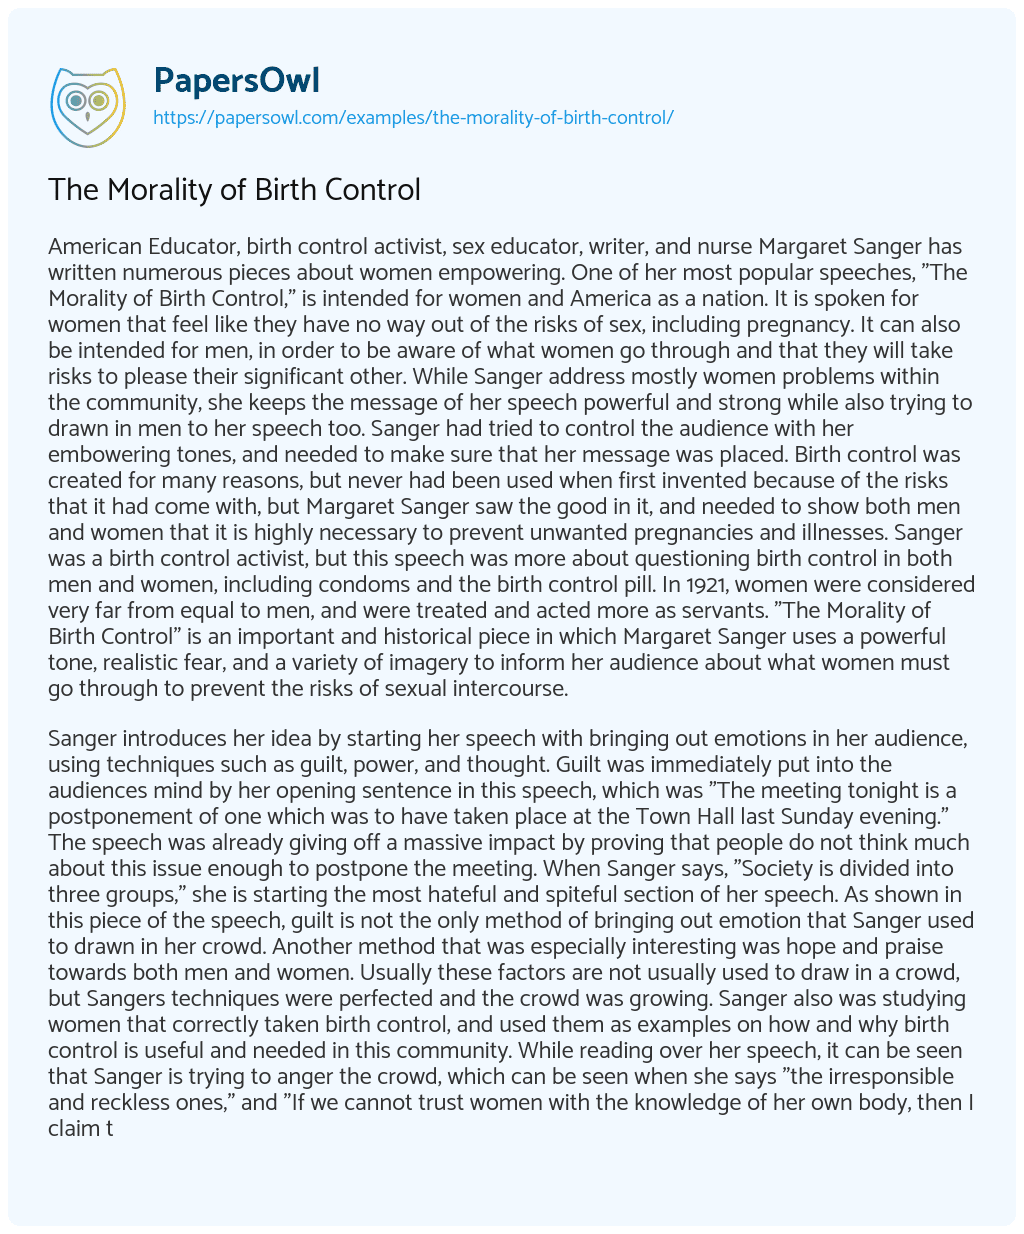 Essay on The Morality of Birth Control